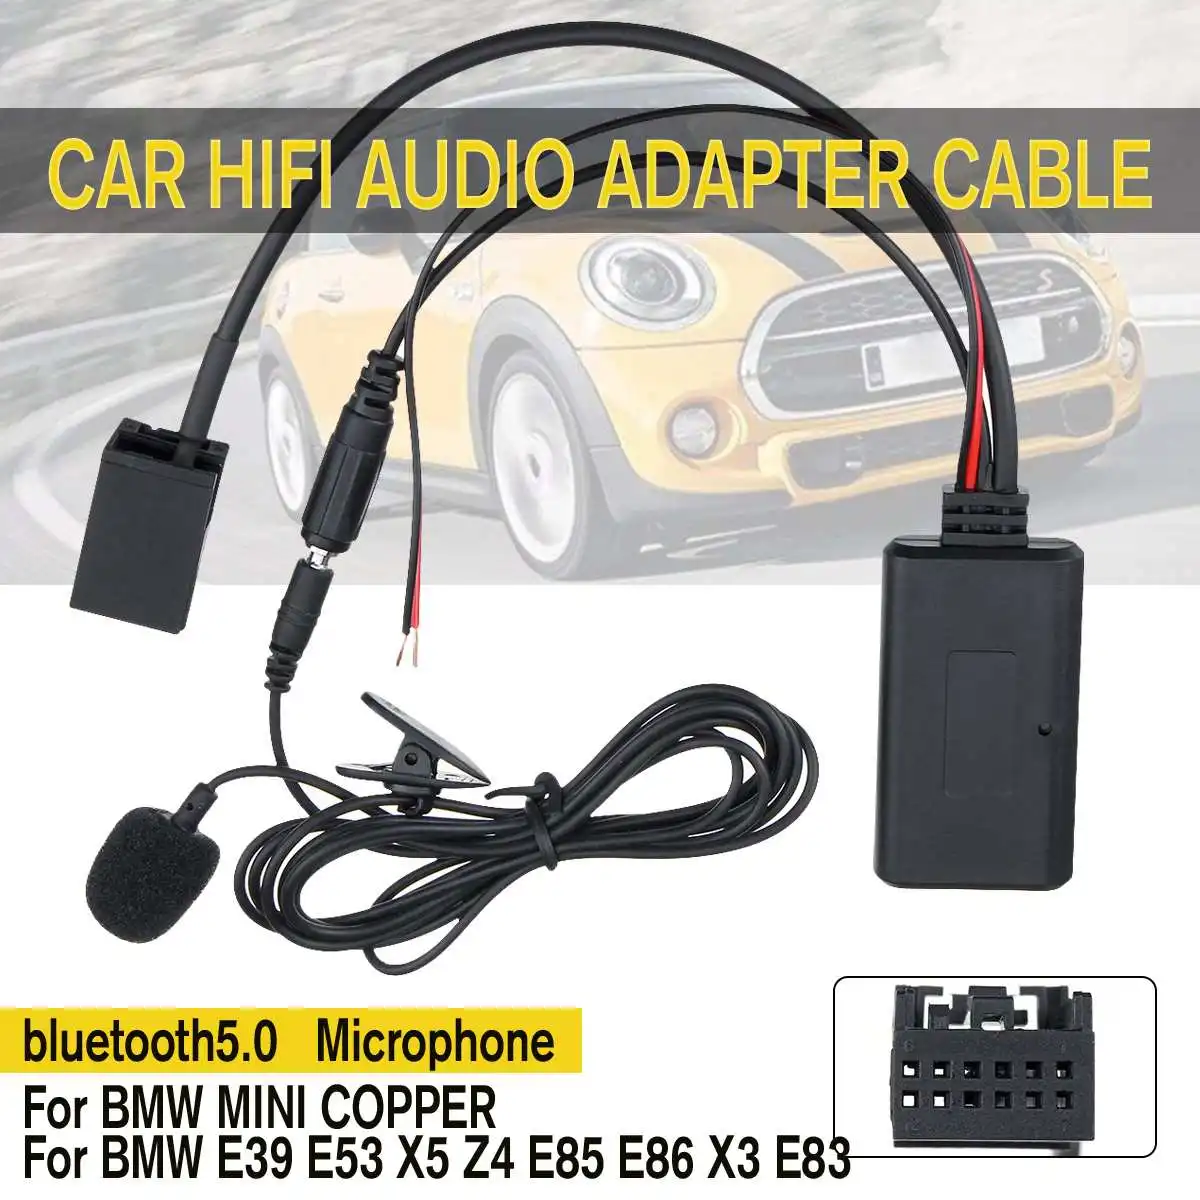 

AUX Car Audio bluetooth 5.0 HIFI Cable Adaptor Microphone For BMW E83 85 86 for MINI COOPER